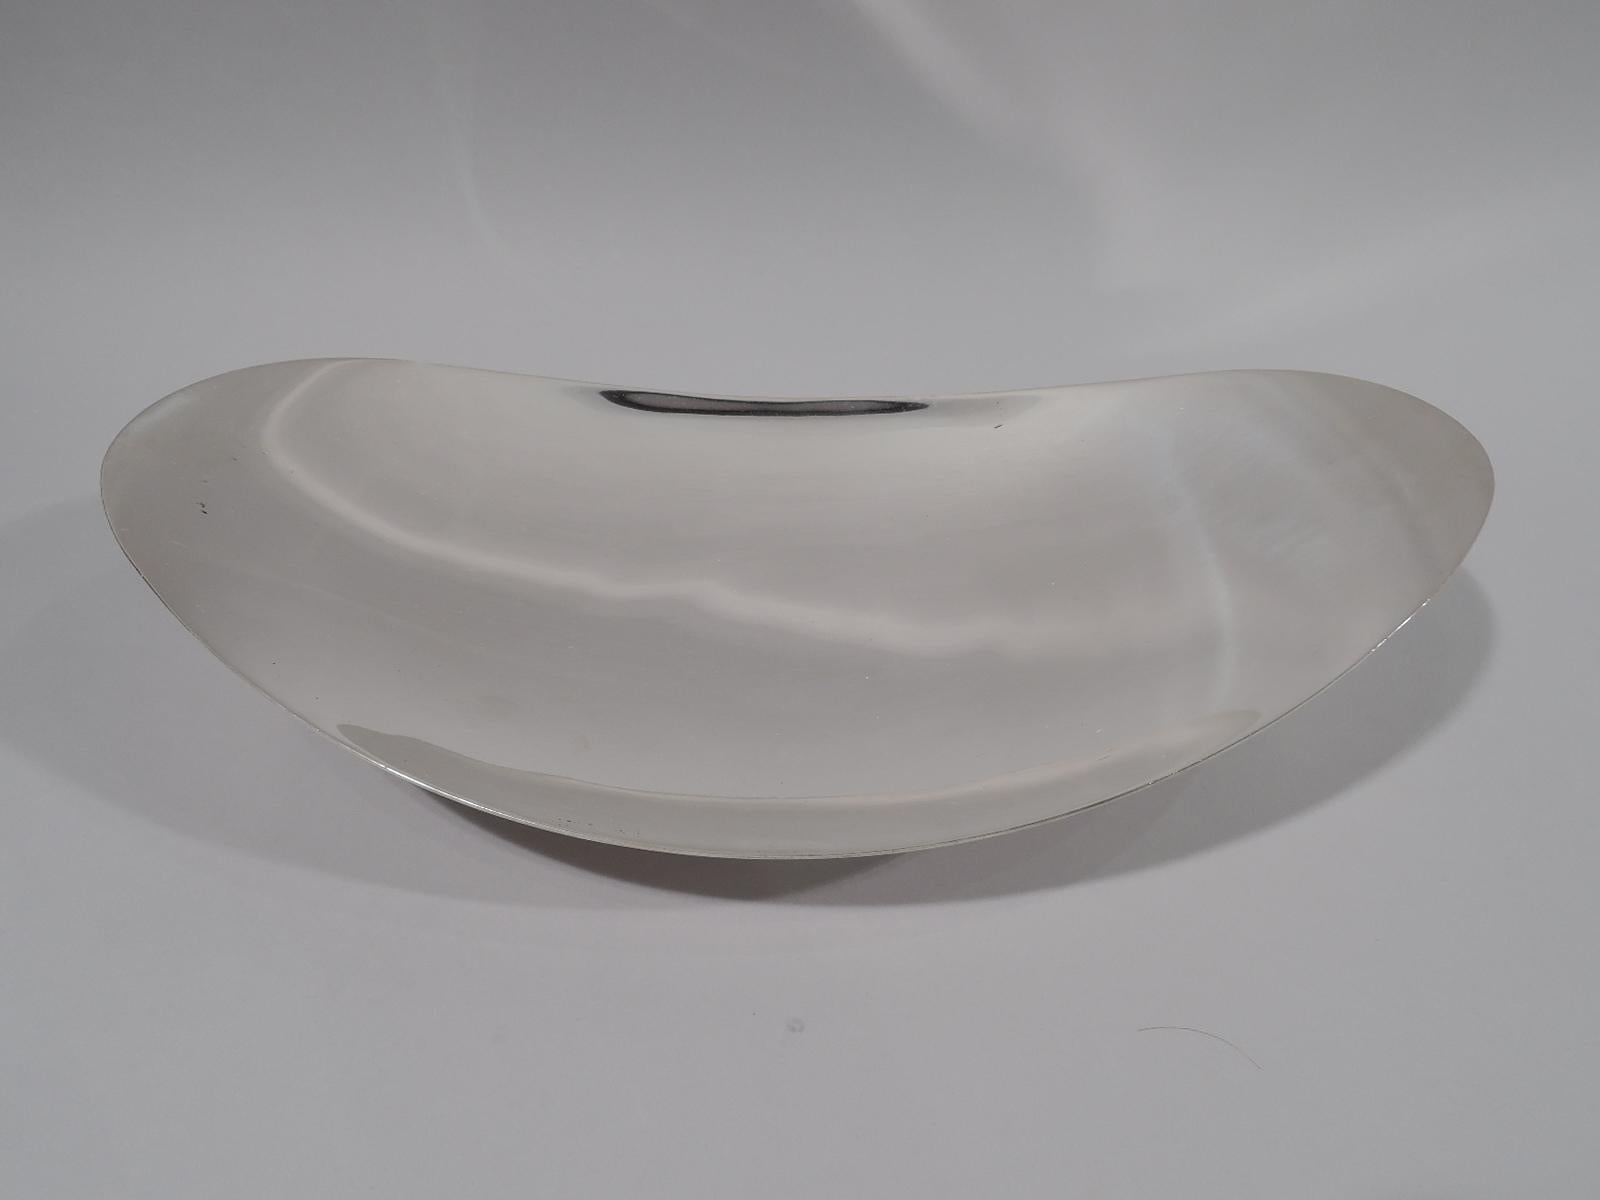 Mid-Century Modern sterling silver bowl. Made by Tiffany & Co. in New York. Shallow swooping oval on short and splayed circular foot. Fully marked including pattern 22416 and director’s letter L (circa 1956-1965). Weight: 22.5 troy ounces.